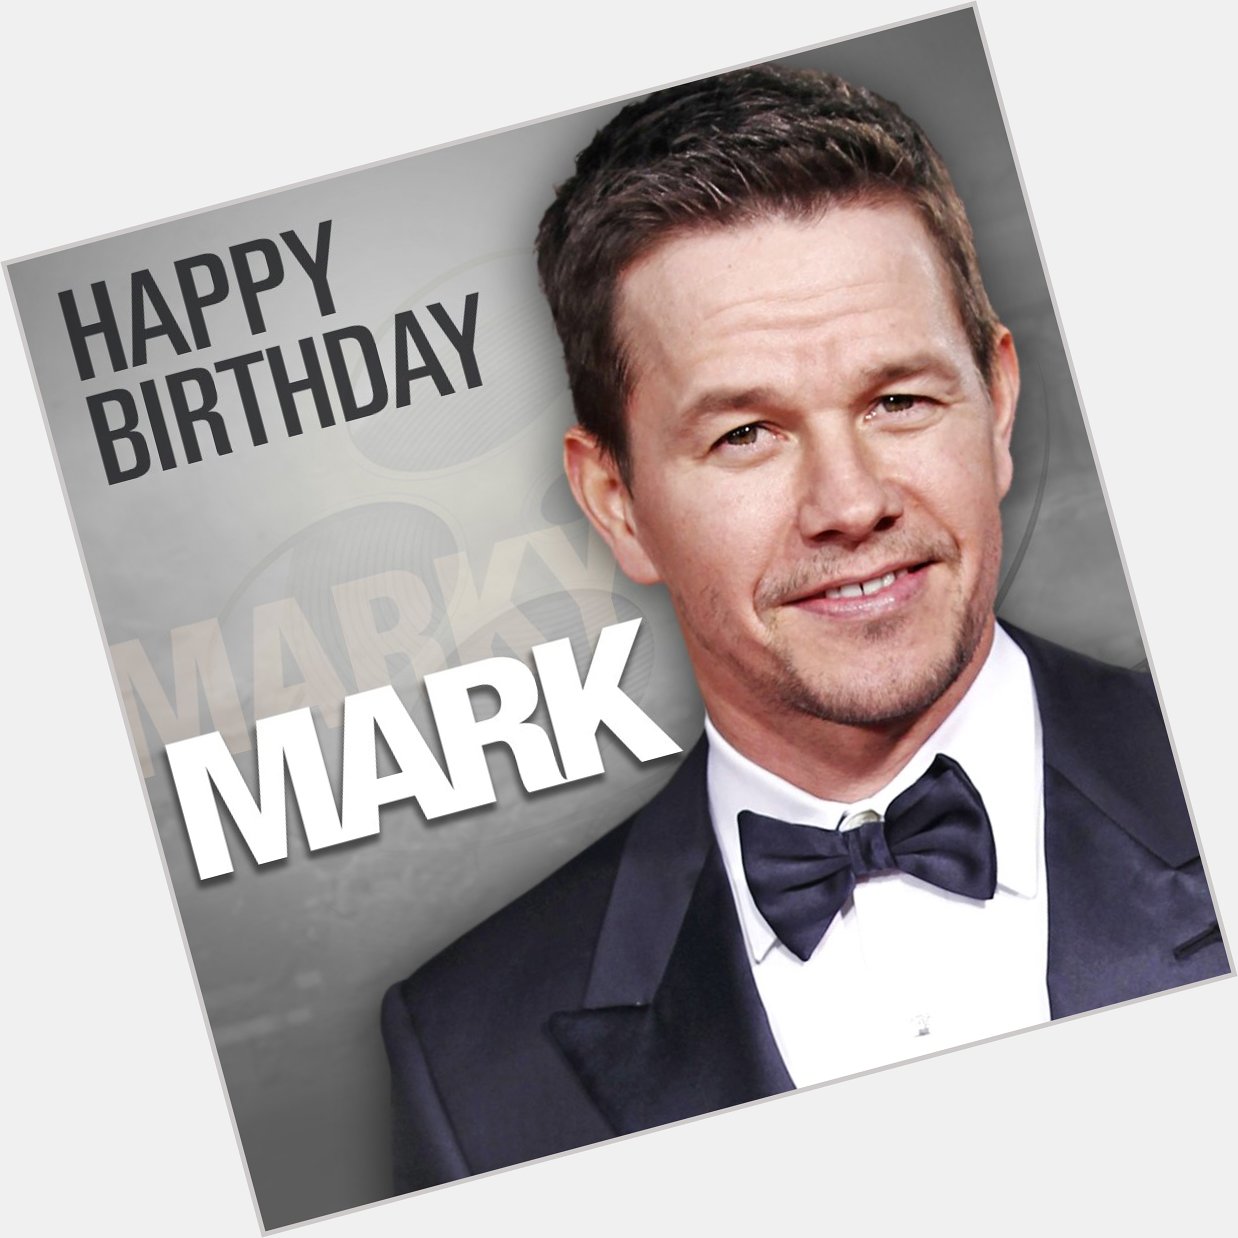 Happy birthday to actor and former rapper Mark Wahlberg. He turns 46 today! 